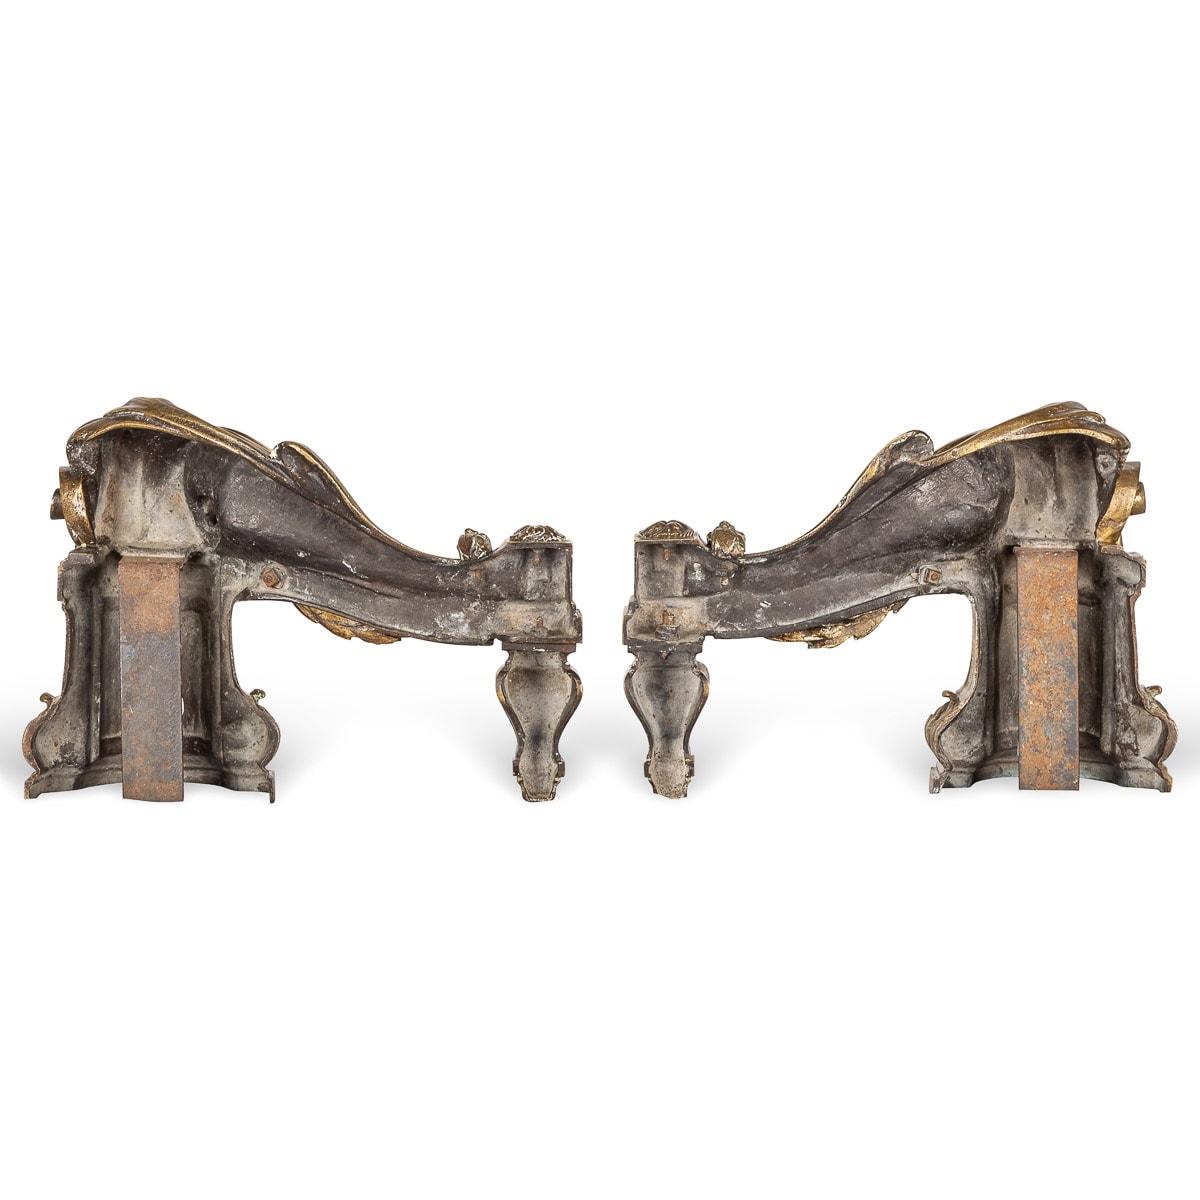 Antique mid 18th century French beautifully cast pair of gilt bronze fireplace chenets. These chenets are adorned with laurel garlands suspended over scrolls and grecian pillers, terminating with cross-key junctions and on shaped